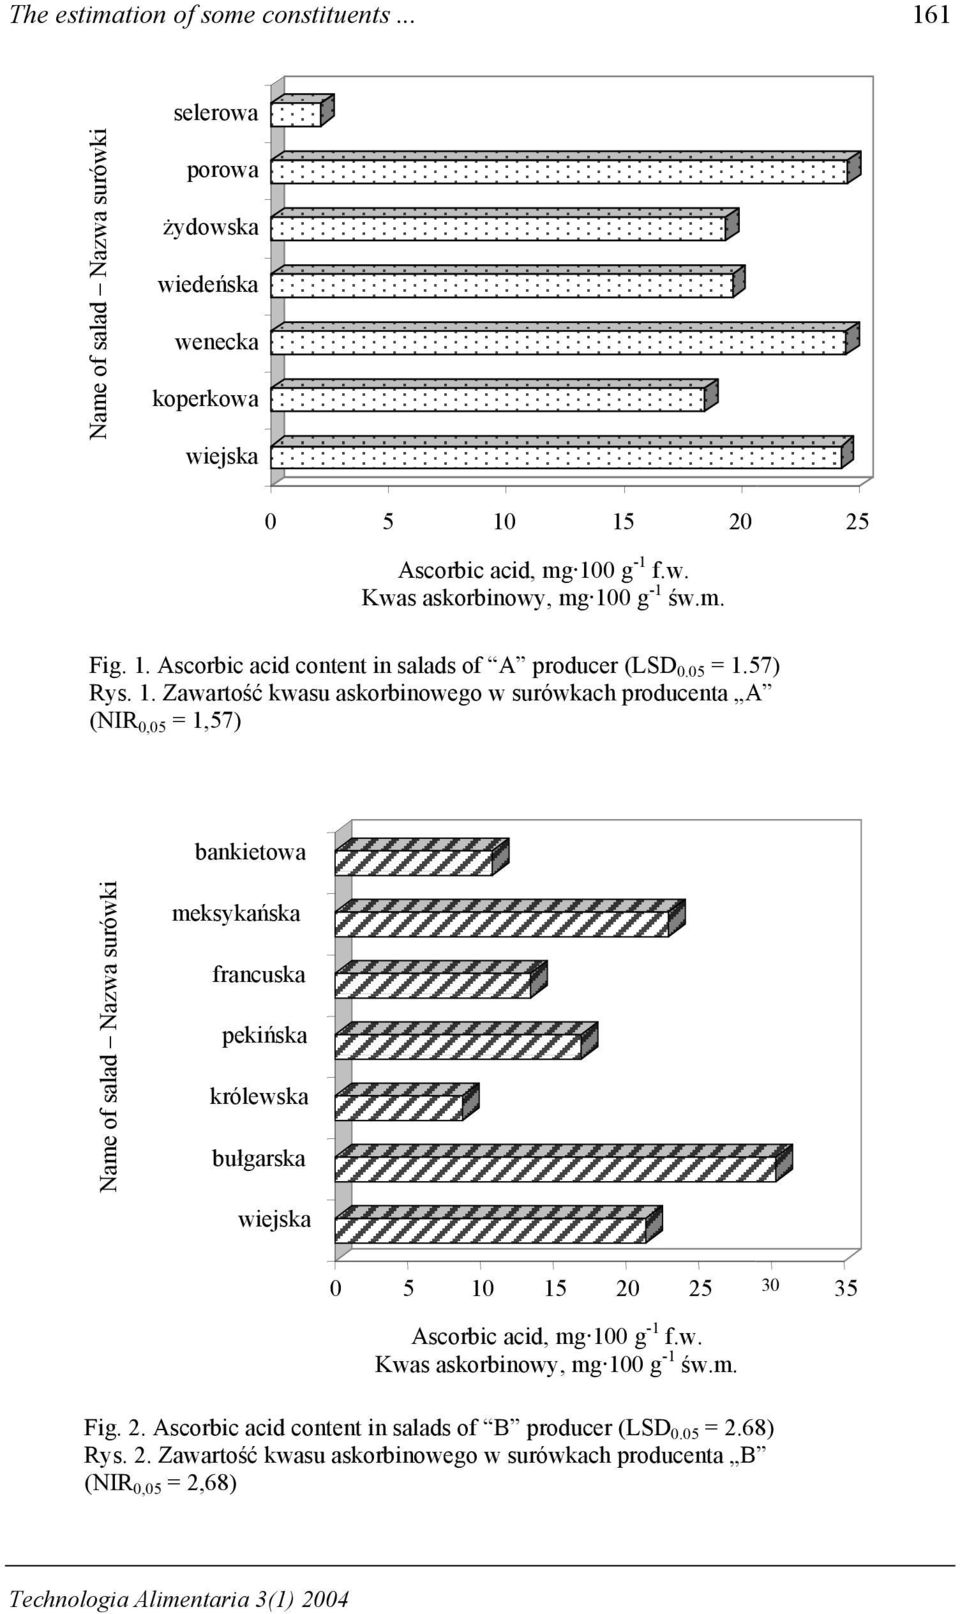 Ascorbic acid content in salads of A producer (LSD 0.05 = 1.